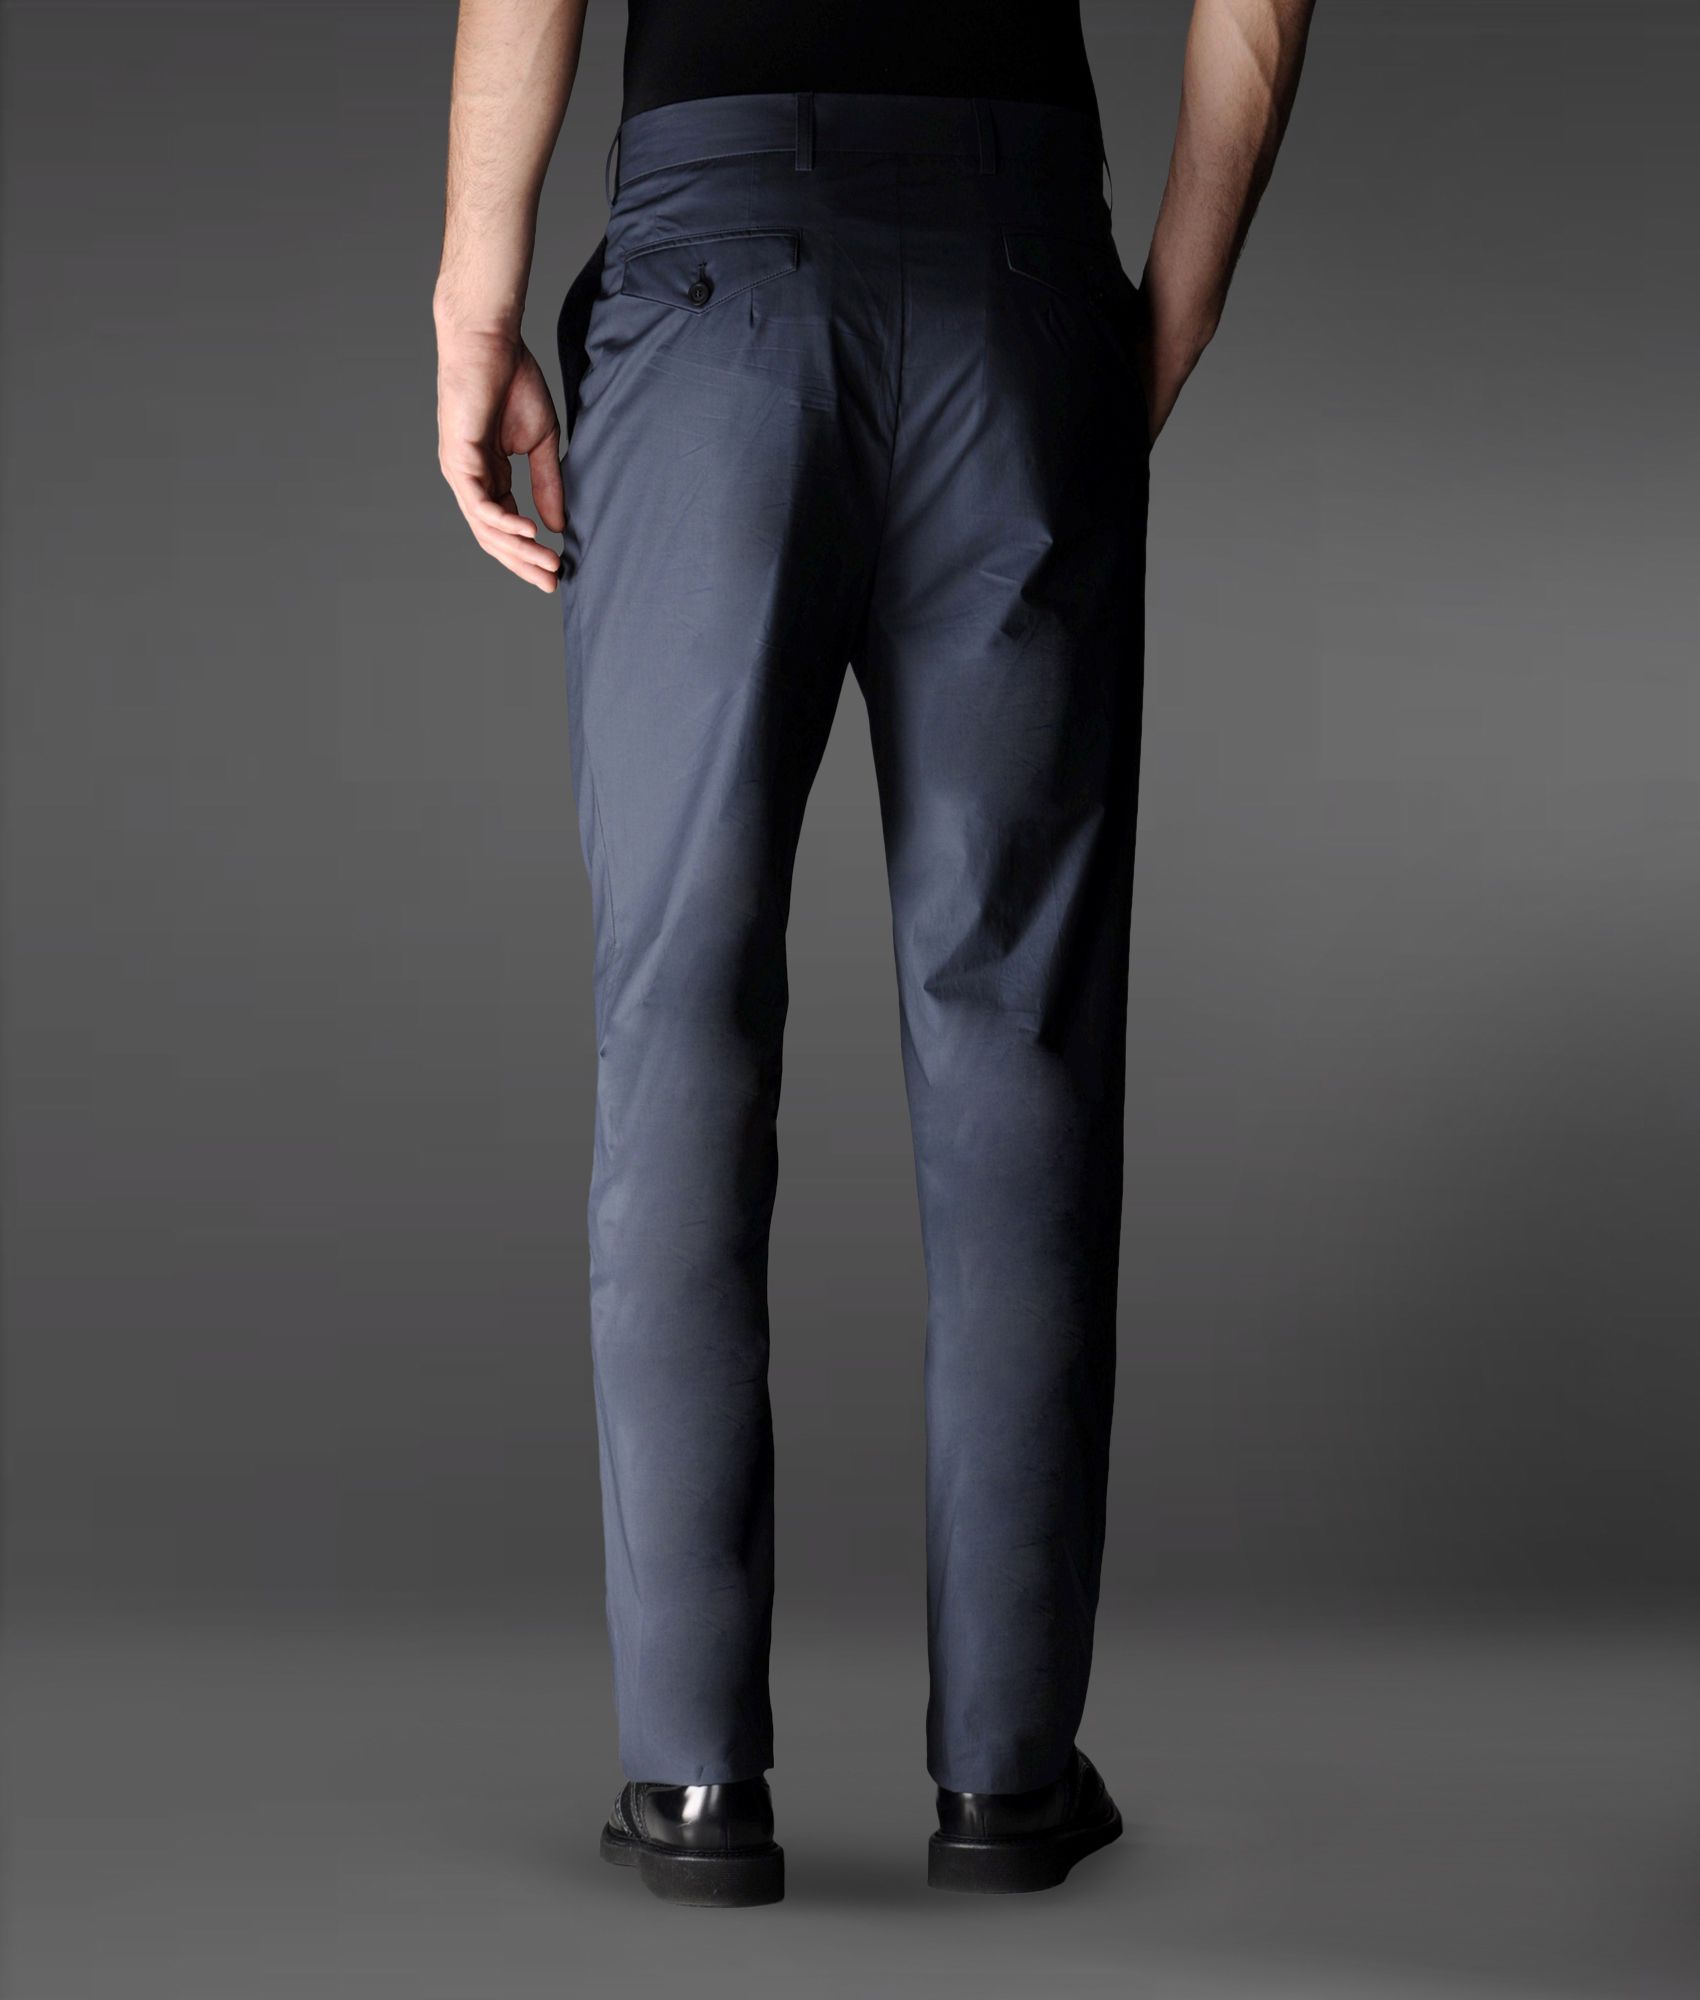 Emporio Armani Pants in Technical Cotton with Darts in Blue for Men - Lyst